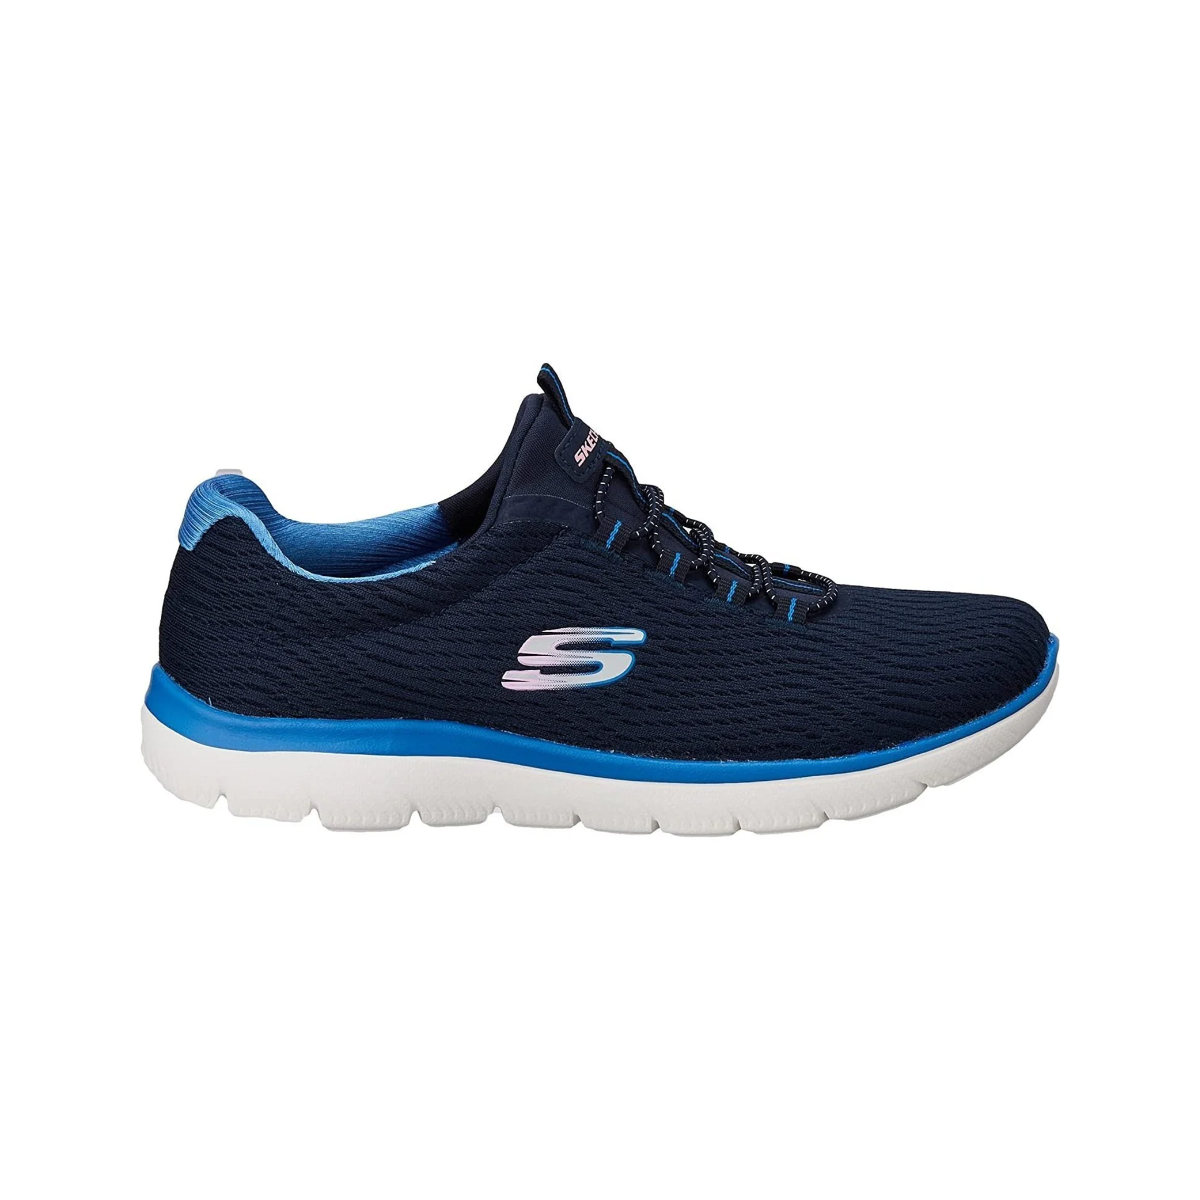 Skechers Summits Next Wave Shoes For Women, Navy Blue